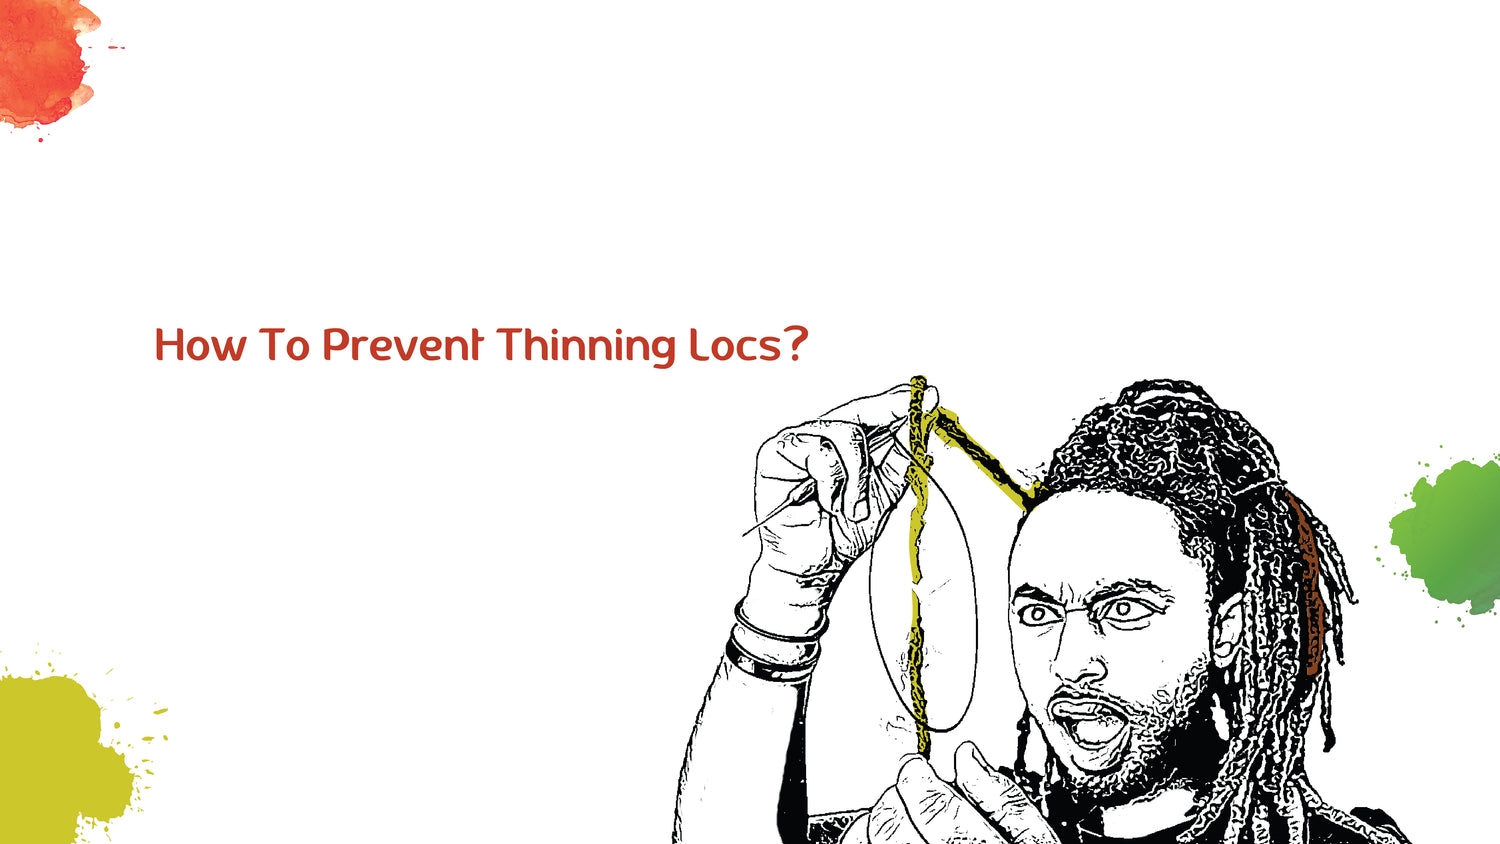 How To Prevent Thinning Locs?